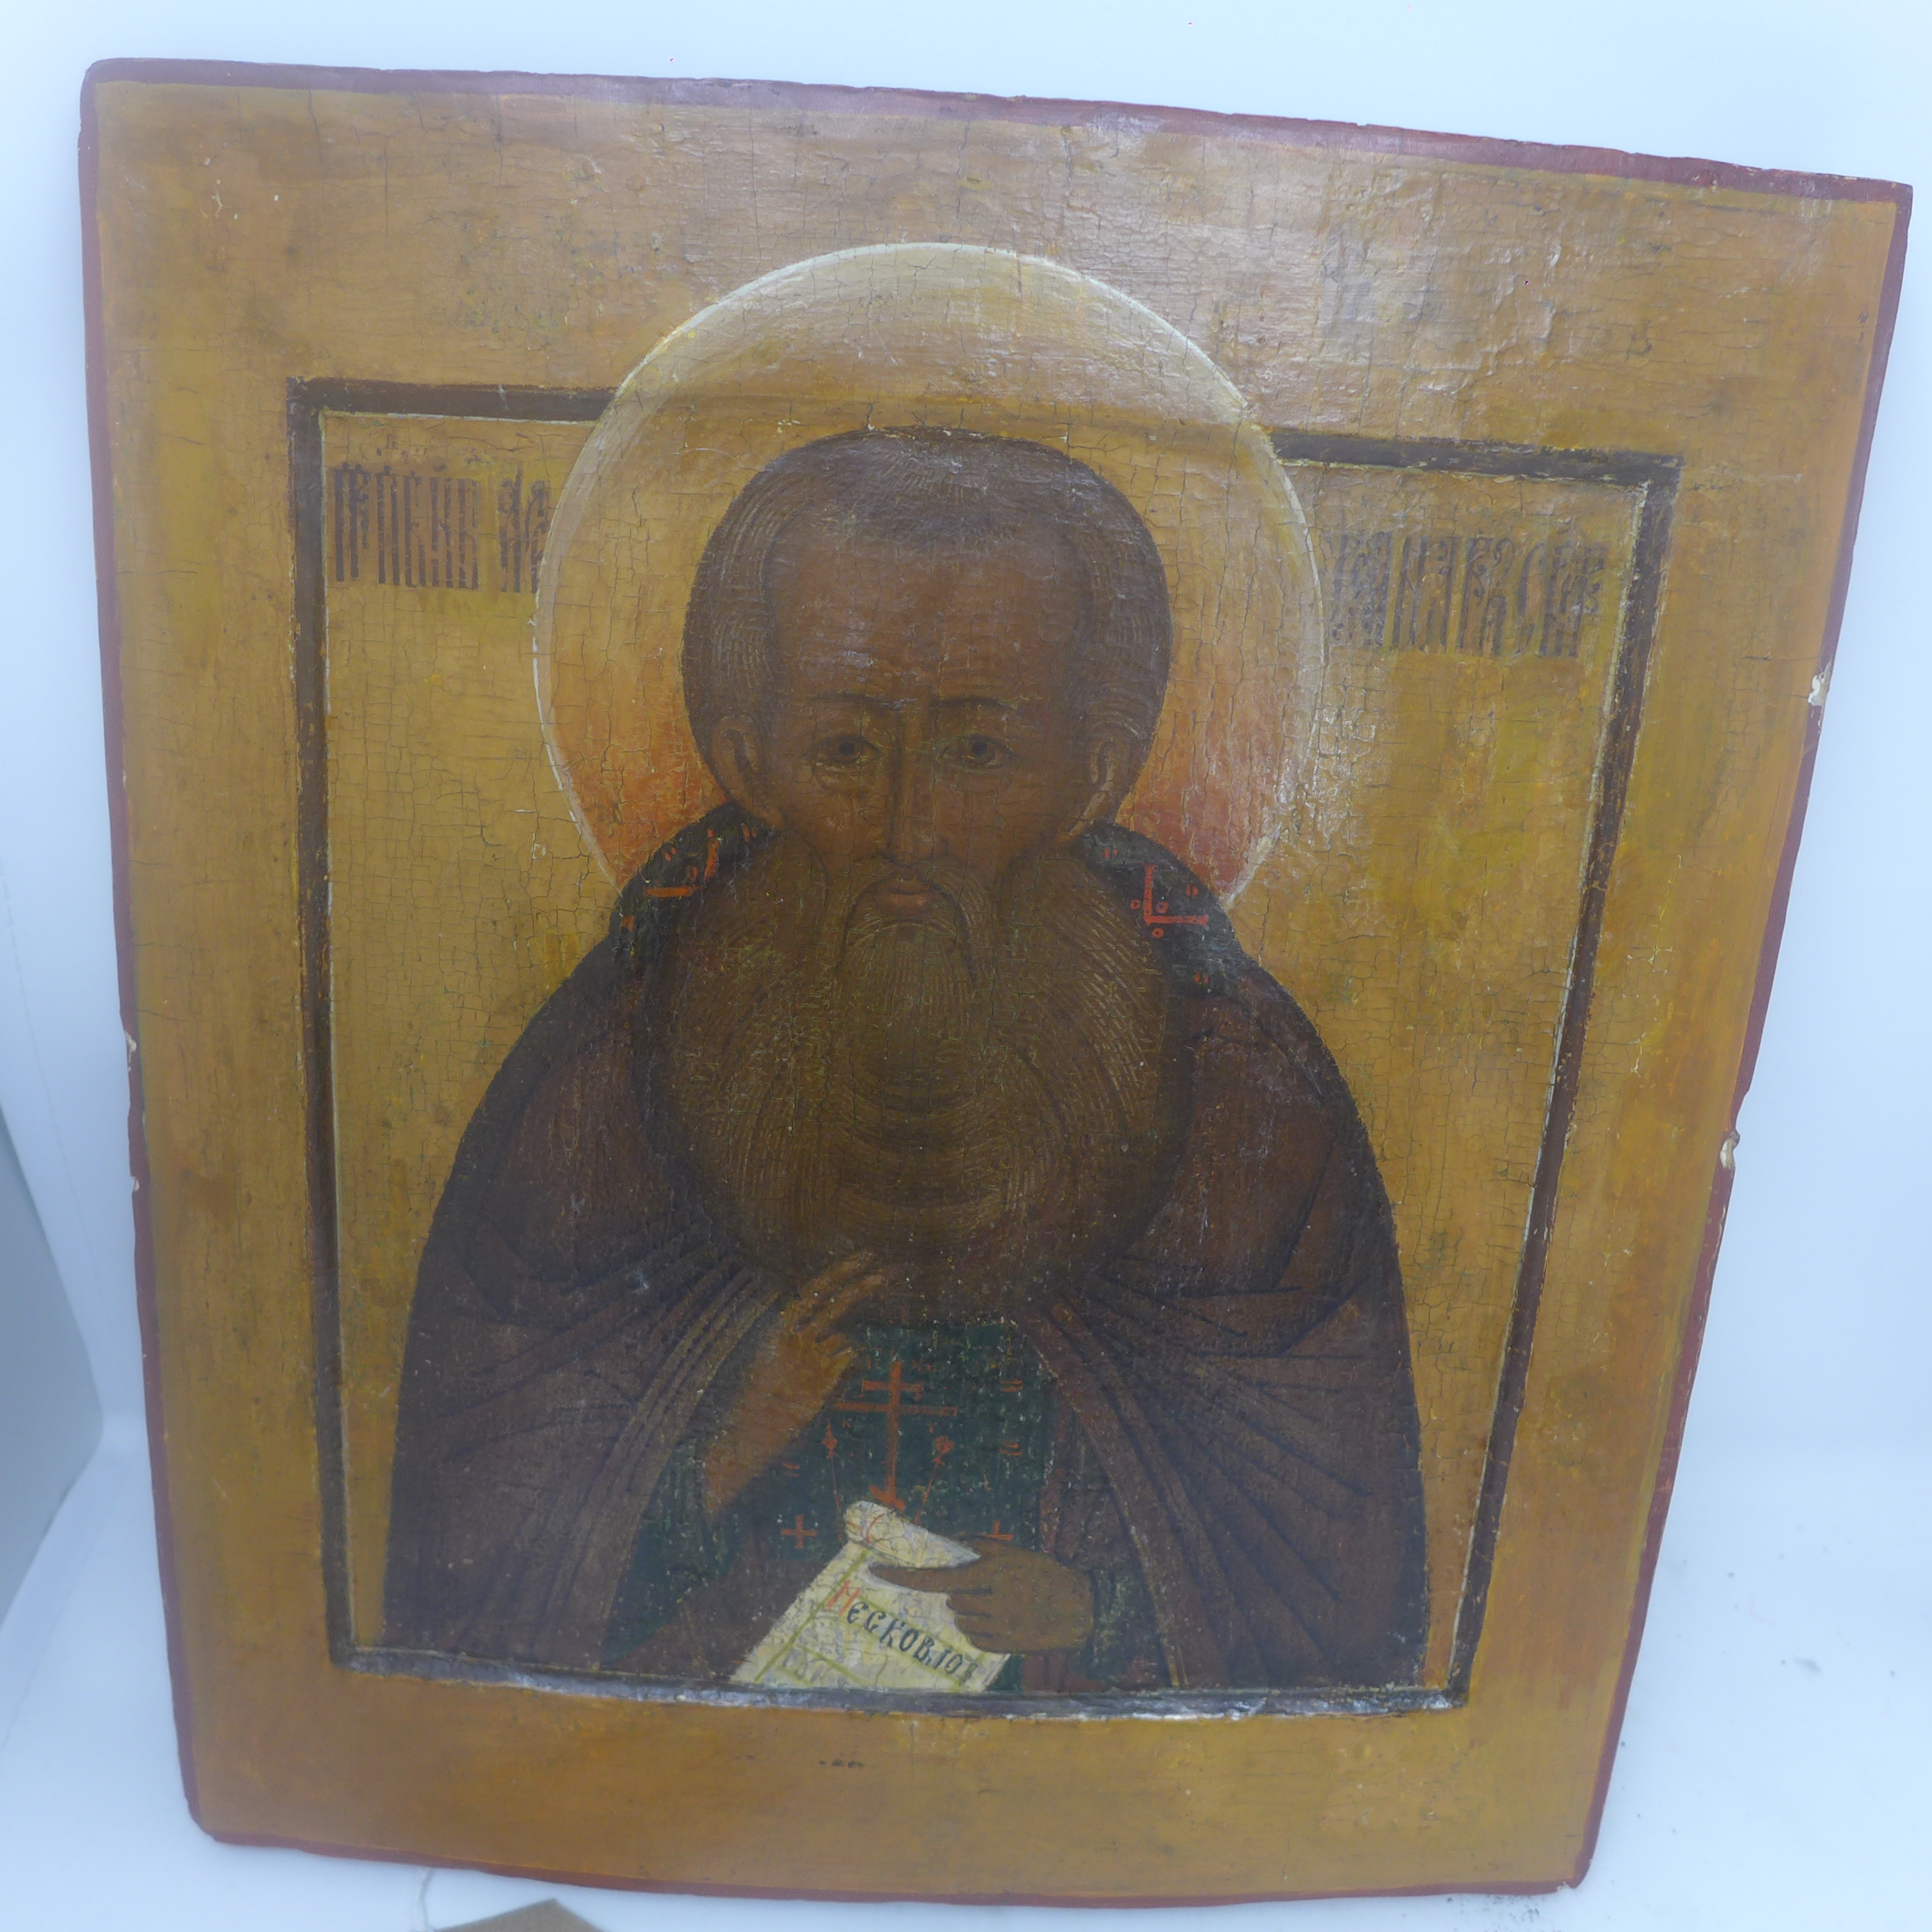 A Russian icon depicting a Saint shown in profile half-length, blessing and holding a scroll of - Image 6 of 8